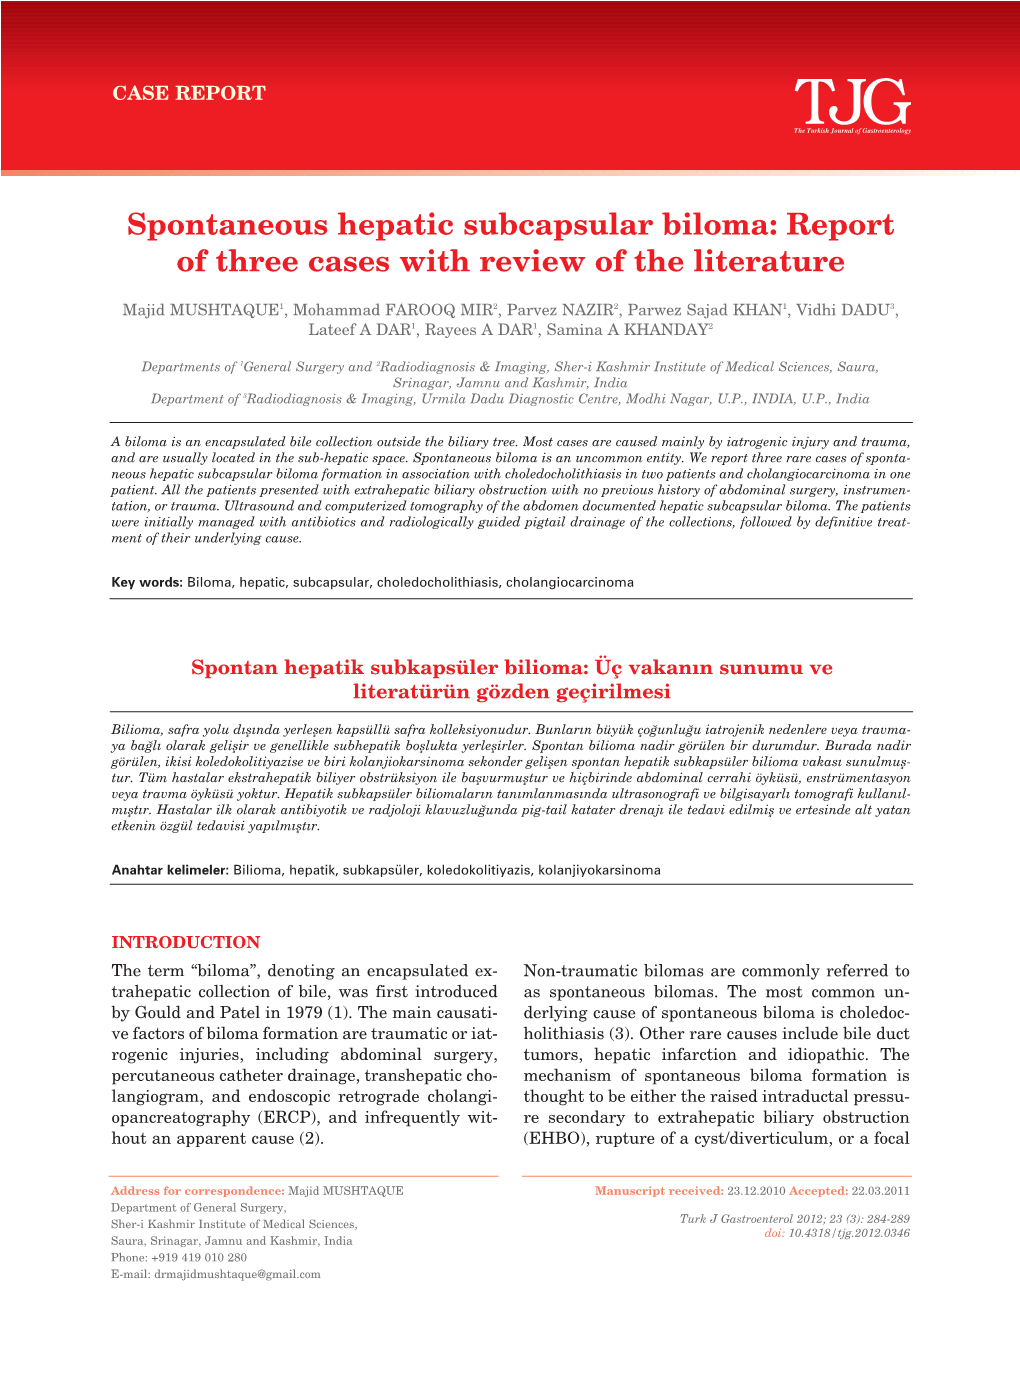 Spontaneous Hepatic Subcapsular Biloma: Report of Three Cases with Review of the Literature